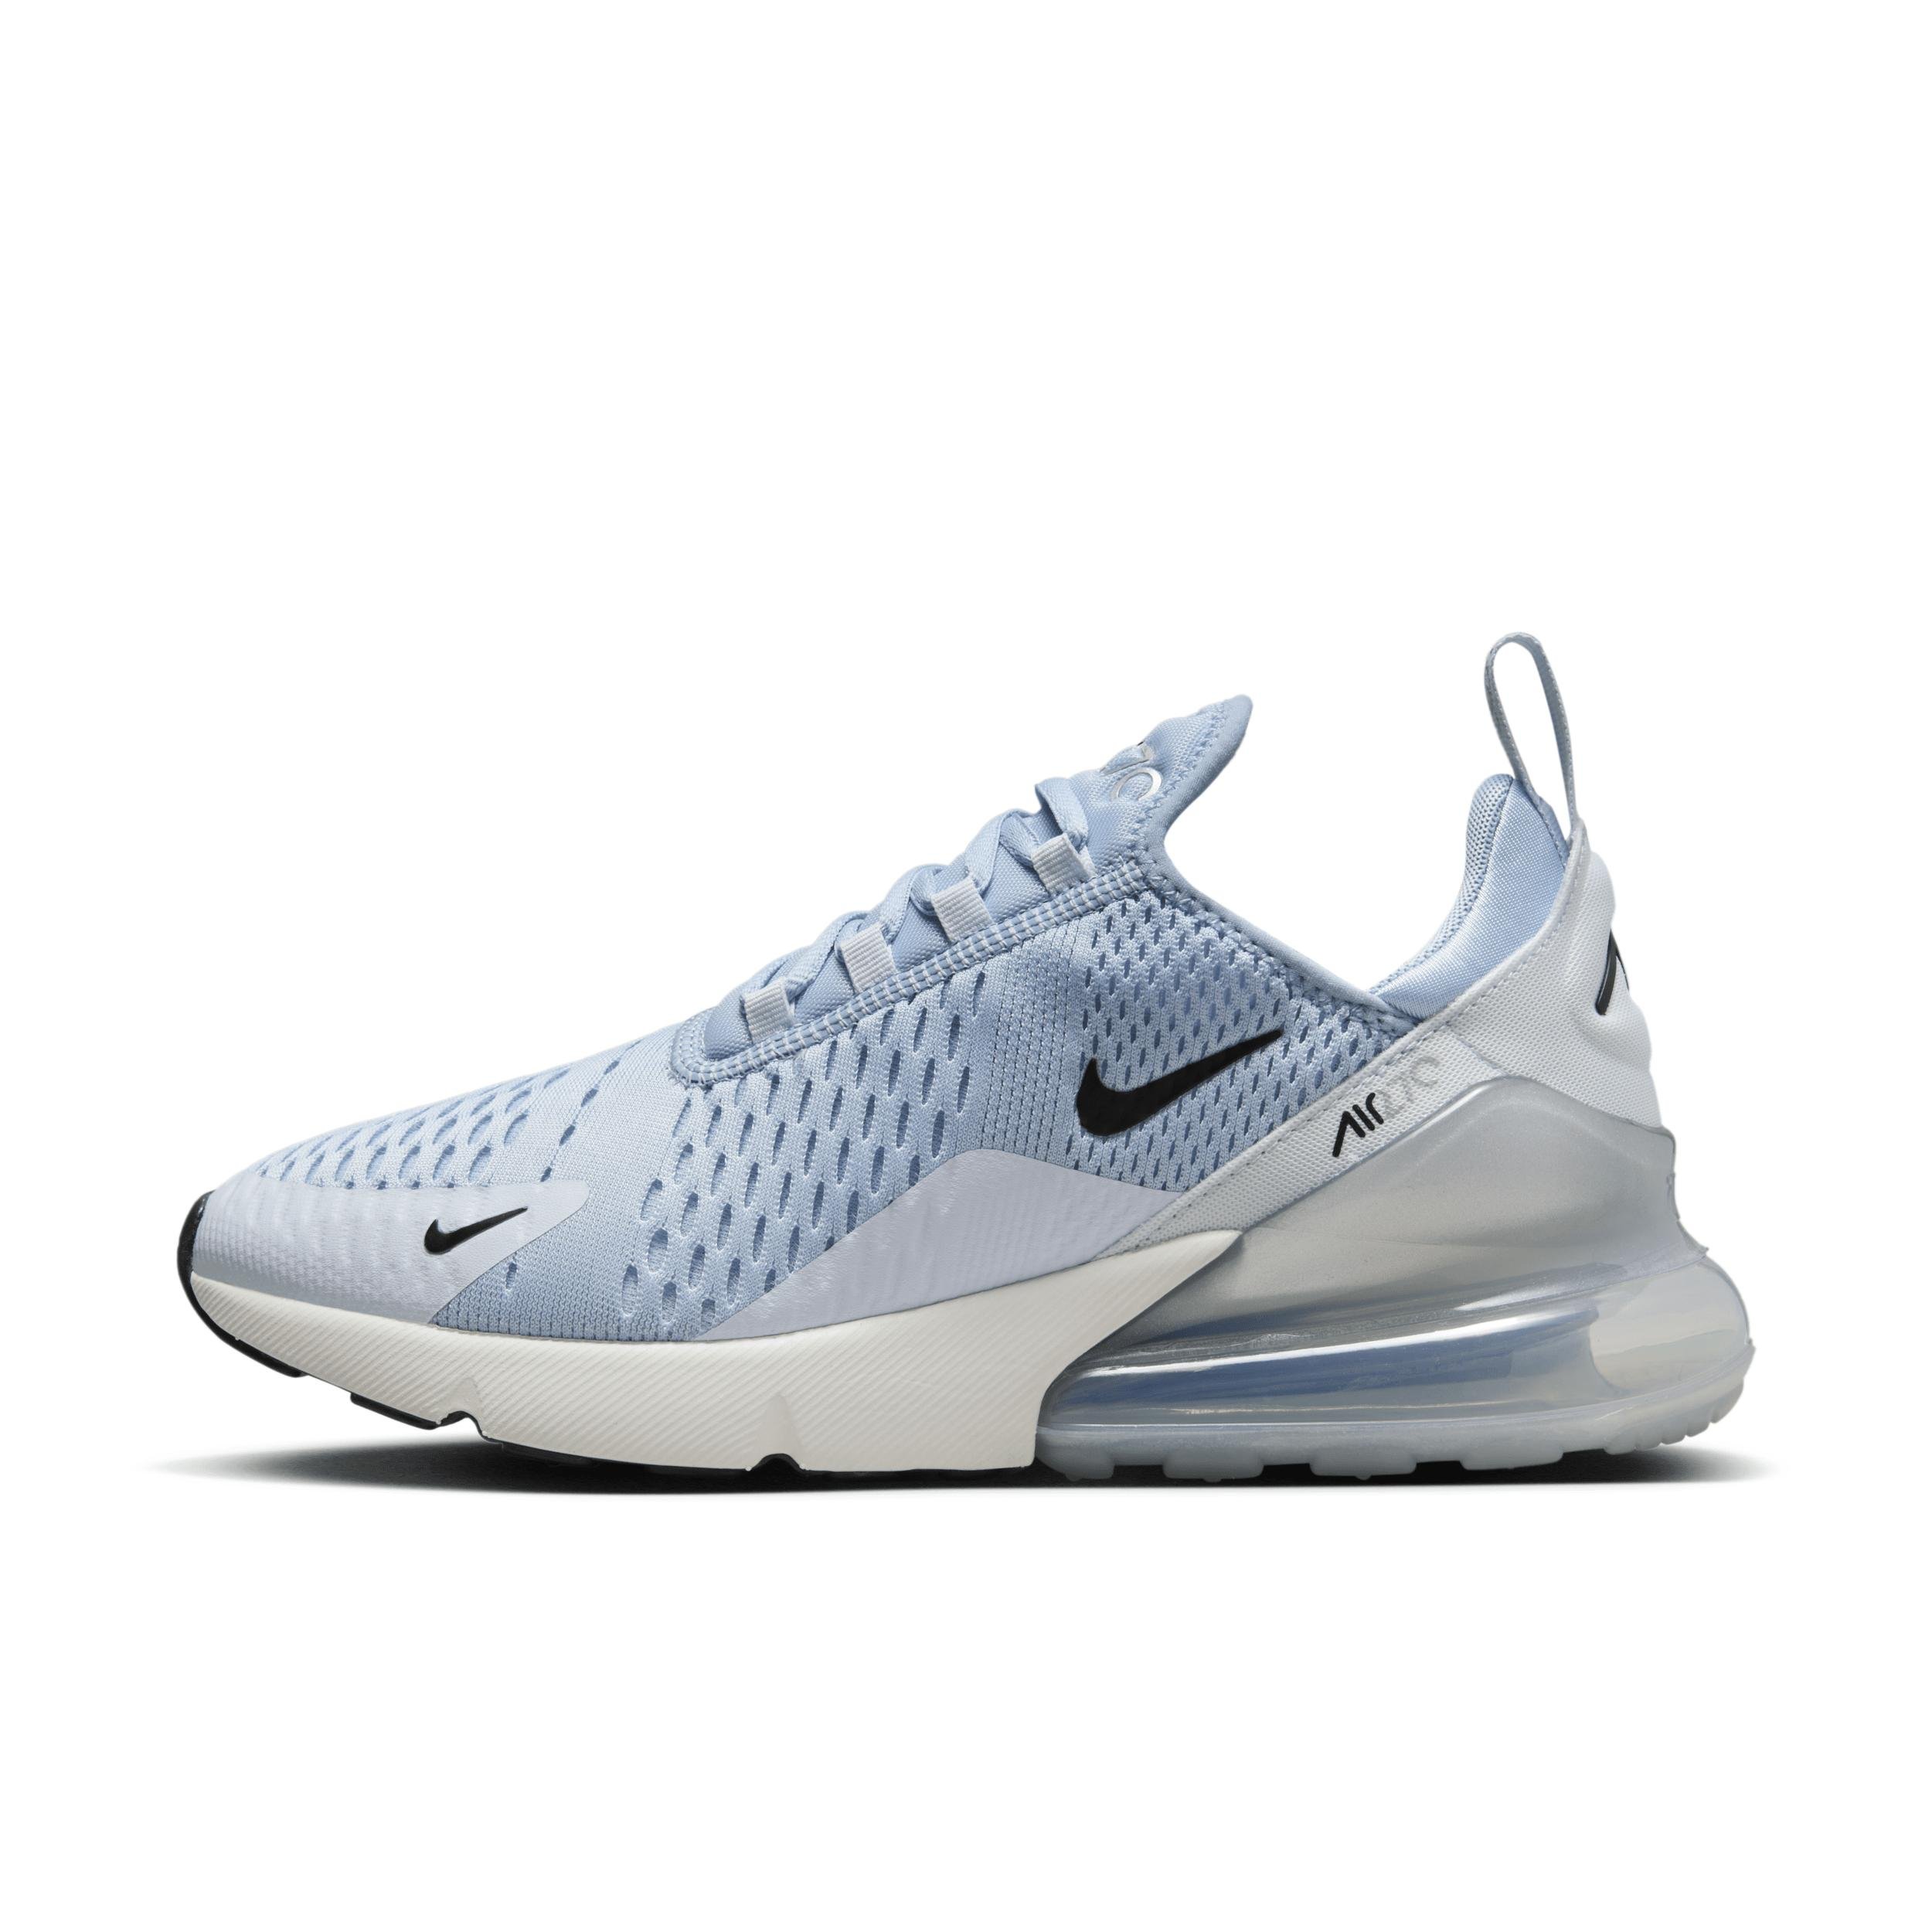 Nike Women's Air Max 270 Shoes by NIKE